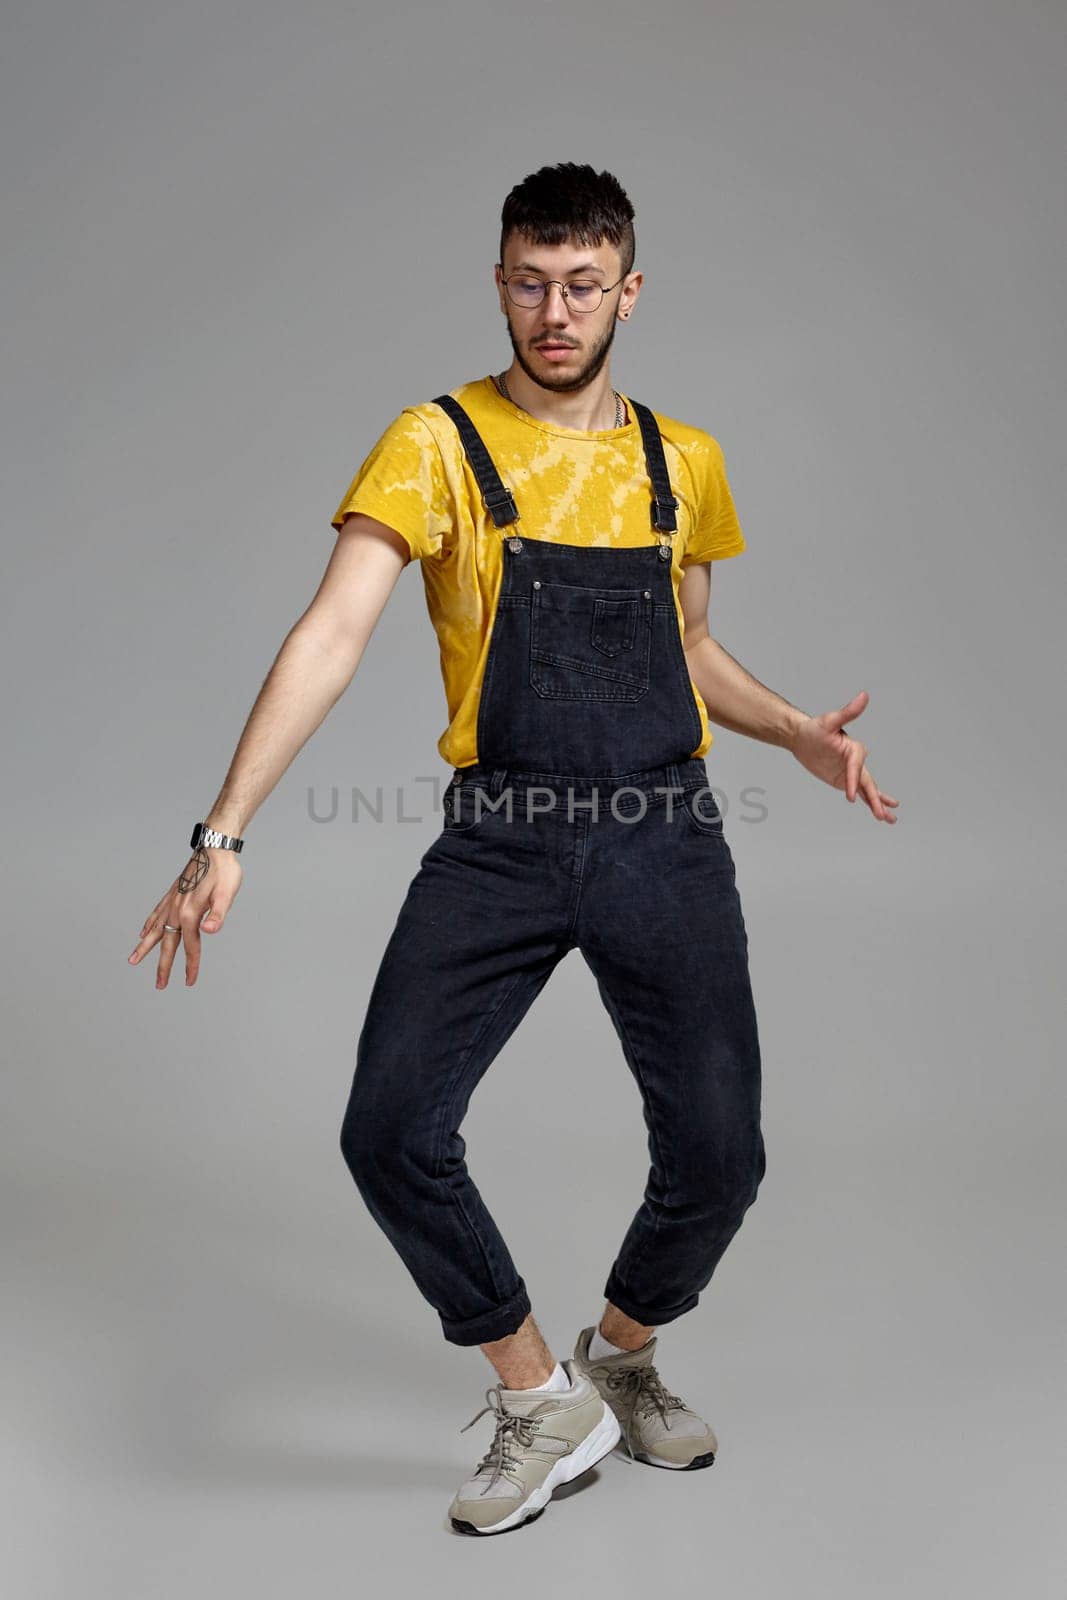 Full-length portrait of a stylish male in glasses, black jumpsuit, yellow t-shirt and gray sneakers fooling around in studio. Indoor photo of a man dancing on a gray background. Music and imagination.